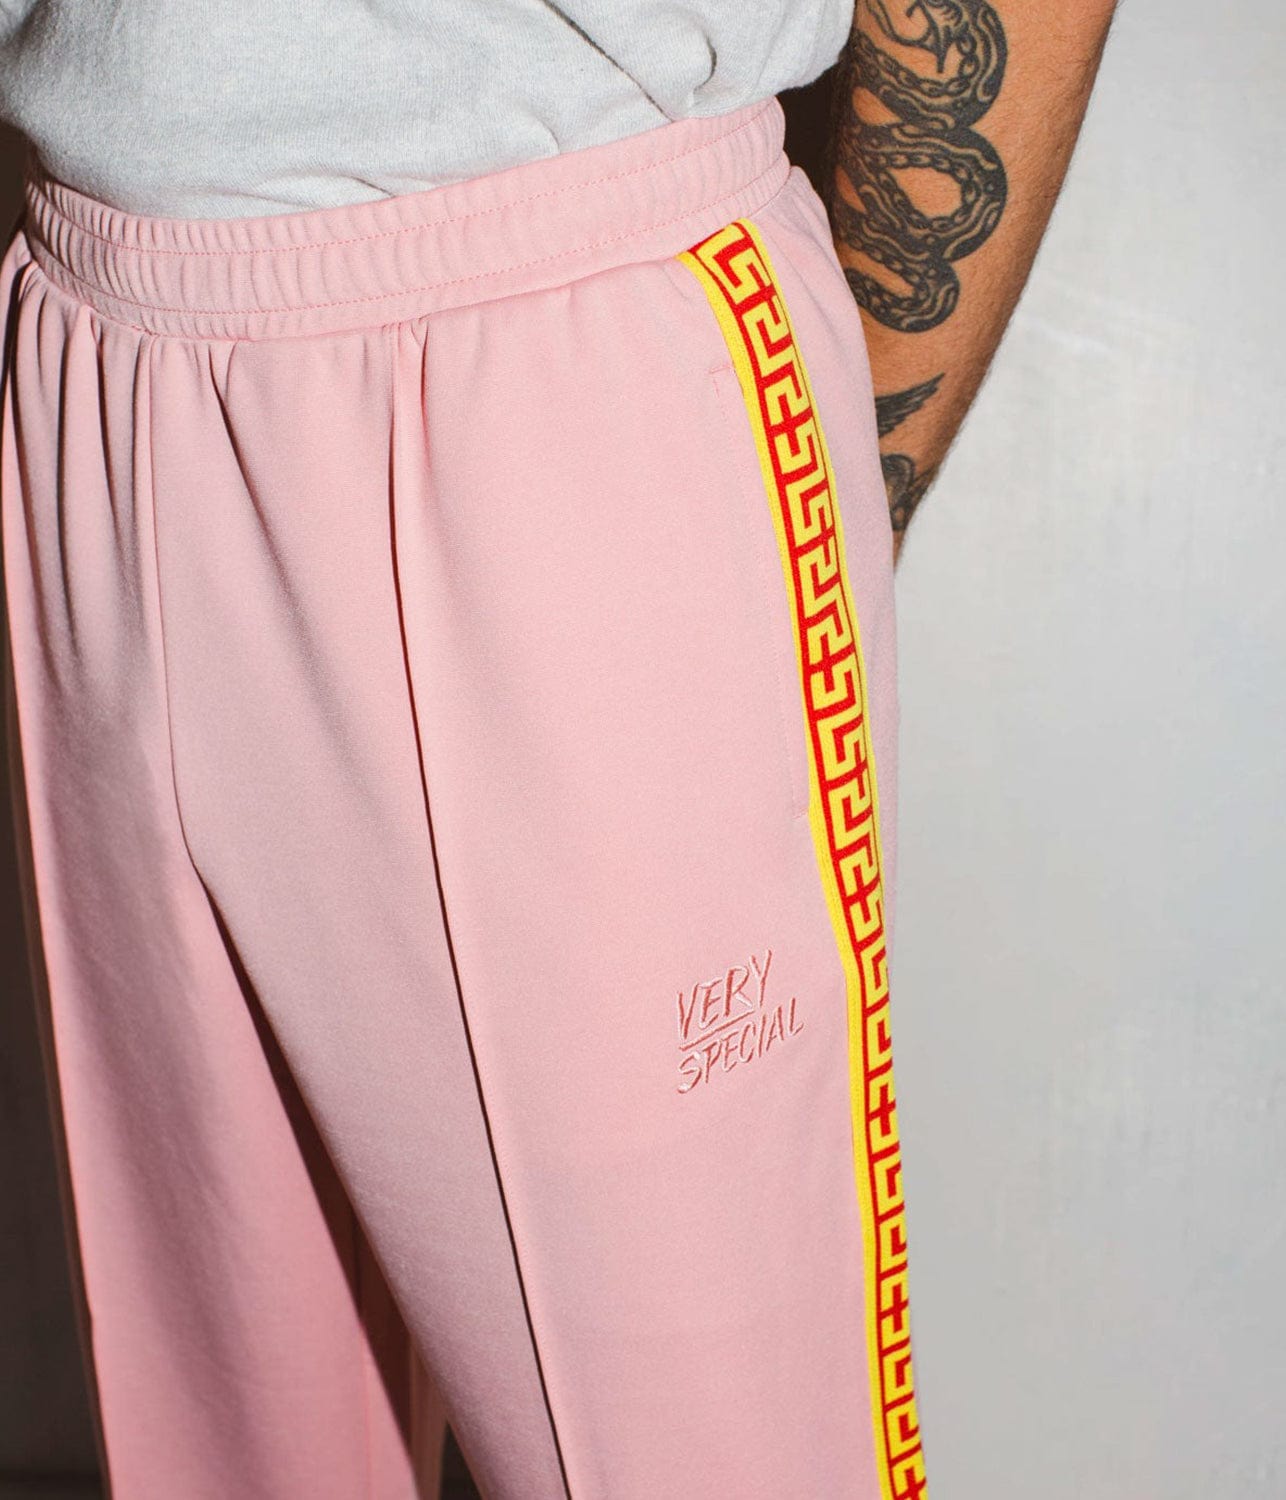 GEO TRACK PANT - PINK | SOMETHING VERY SPECIAL |  SOMETHING VERY SPECIAL GEO TRACK PANT - PINK